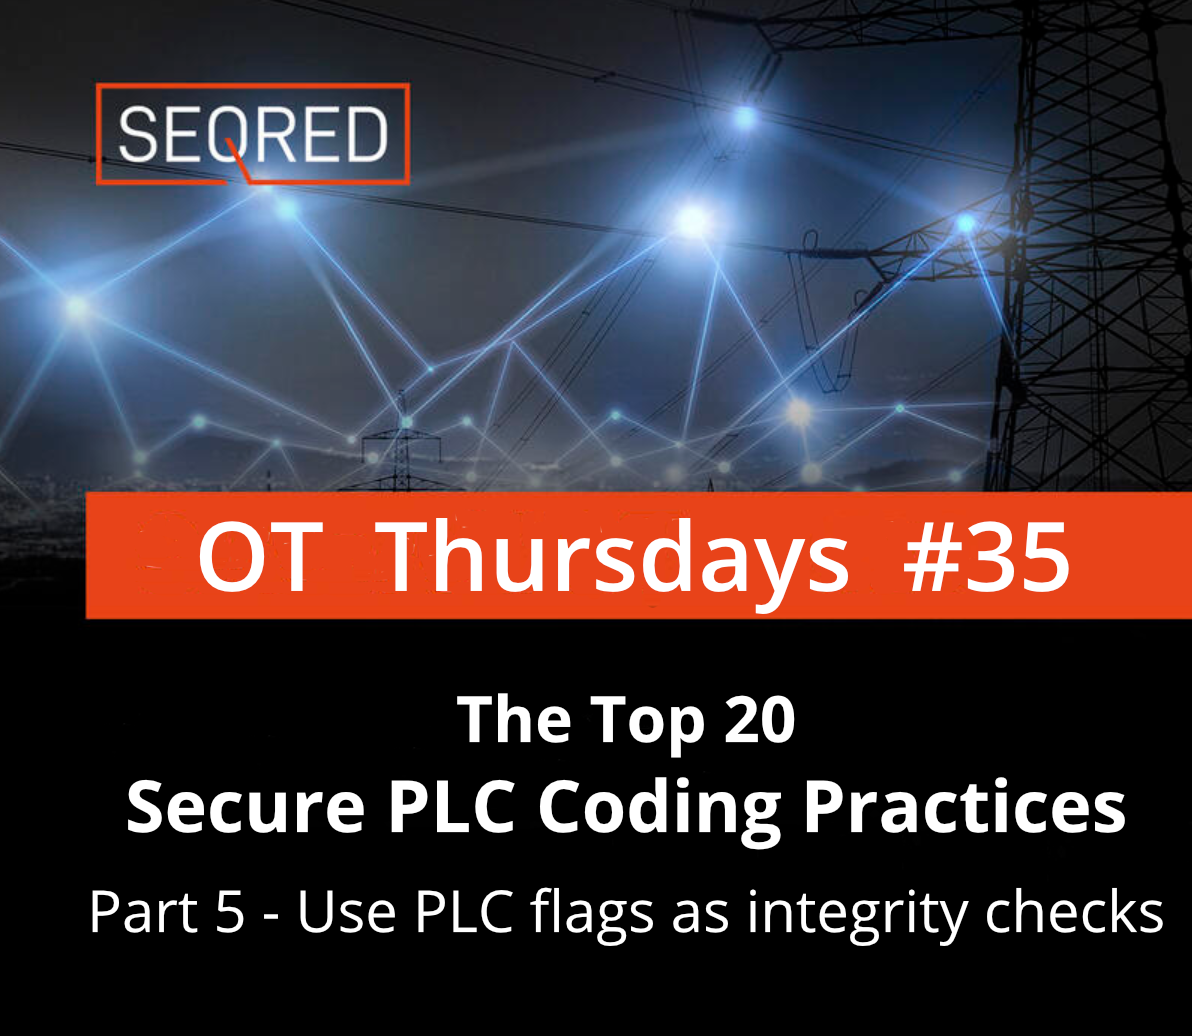 The Top 20 Secure PLC Coding Practices. Part 5 - Use PLC flags as integrity checks